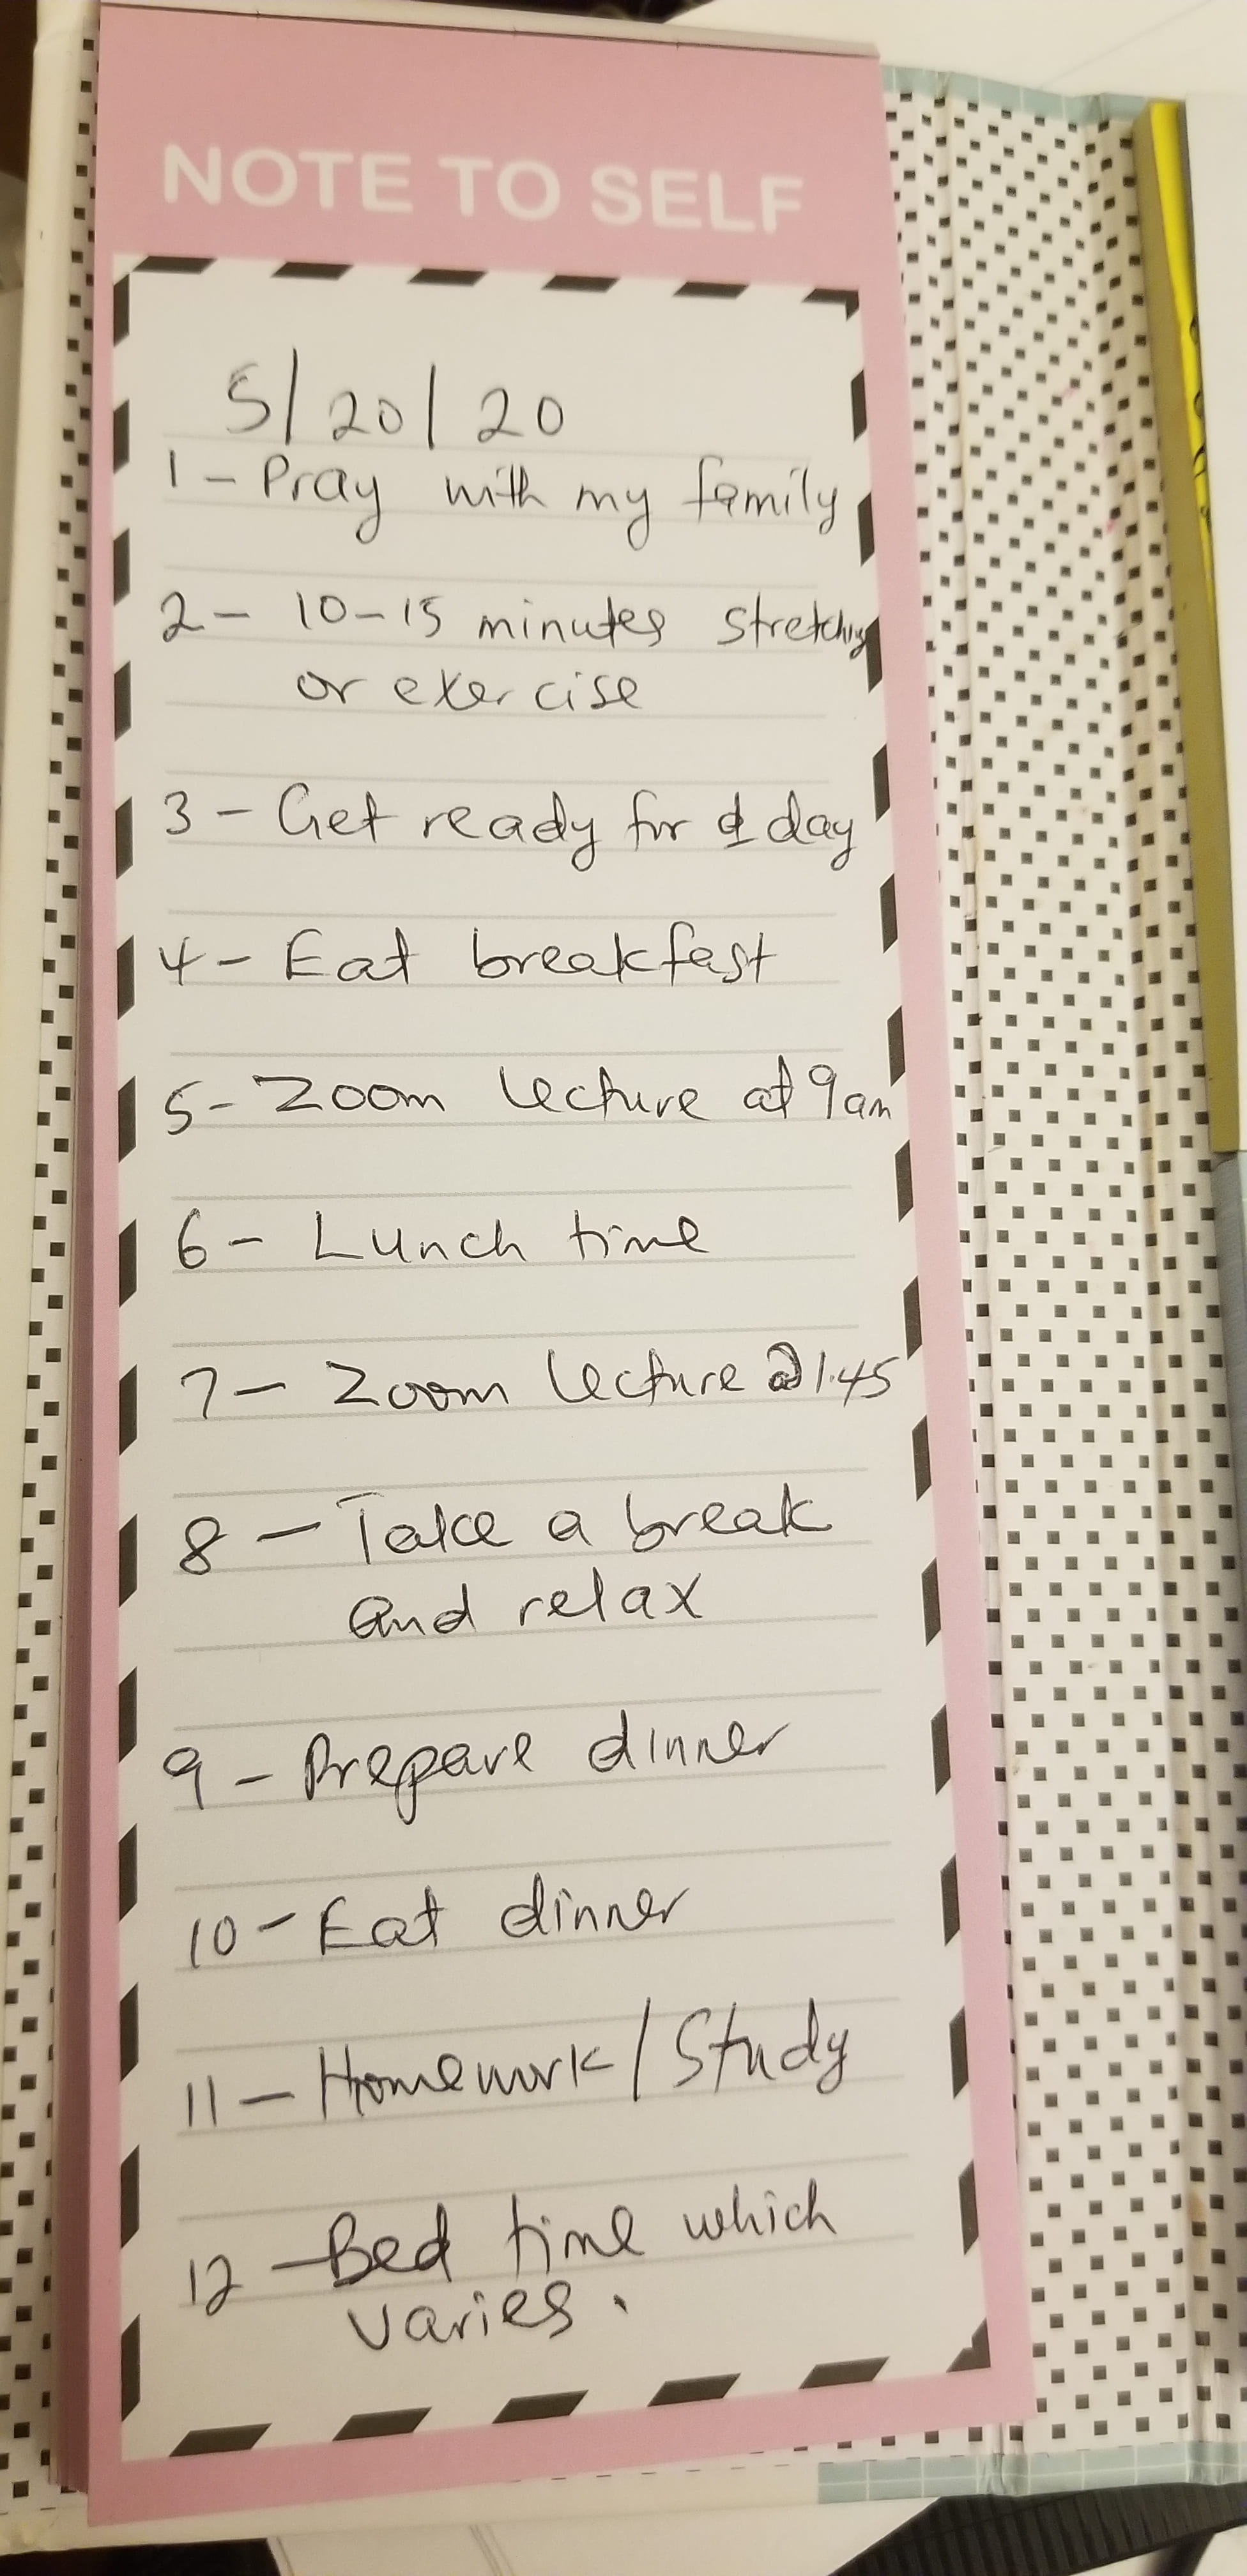 Image of a 12 item to-do list for May 20, 2020. 